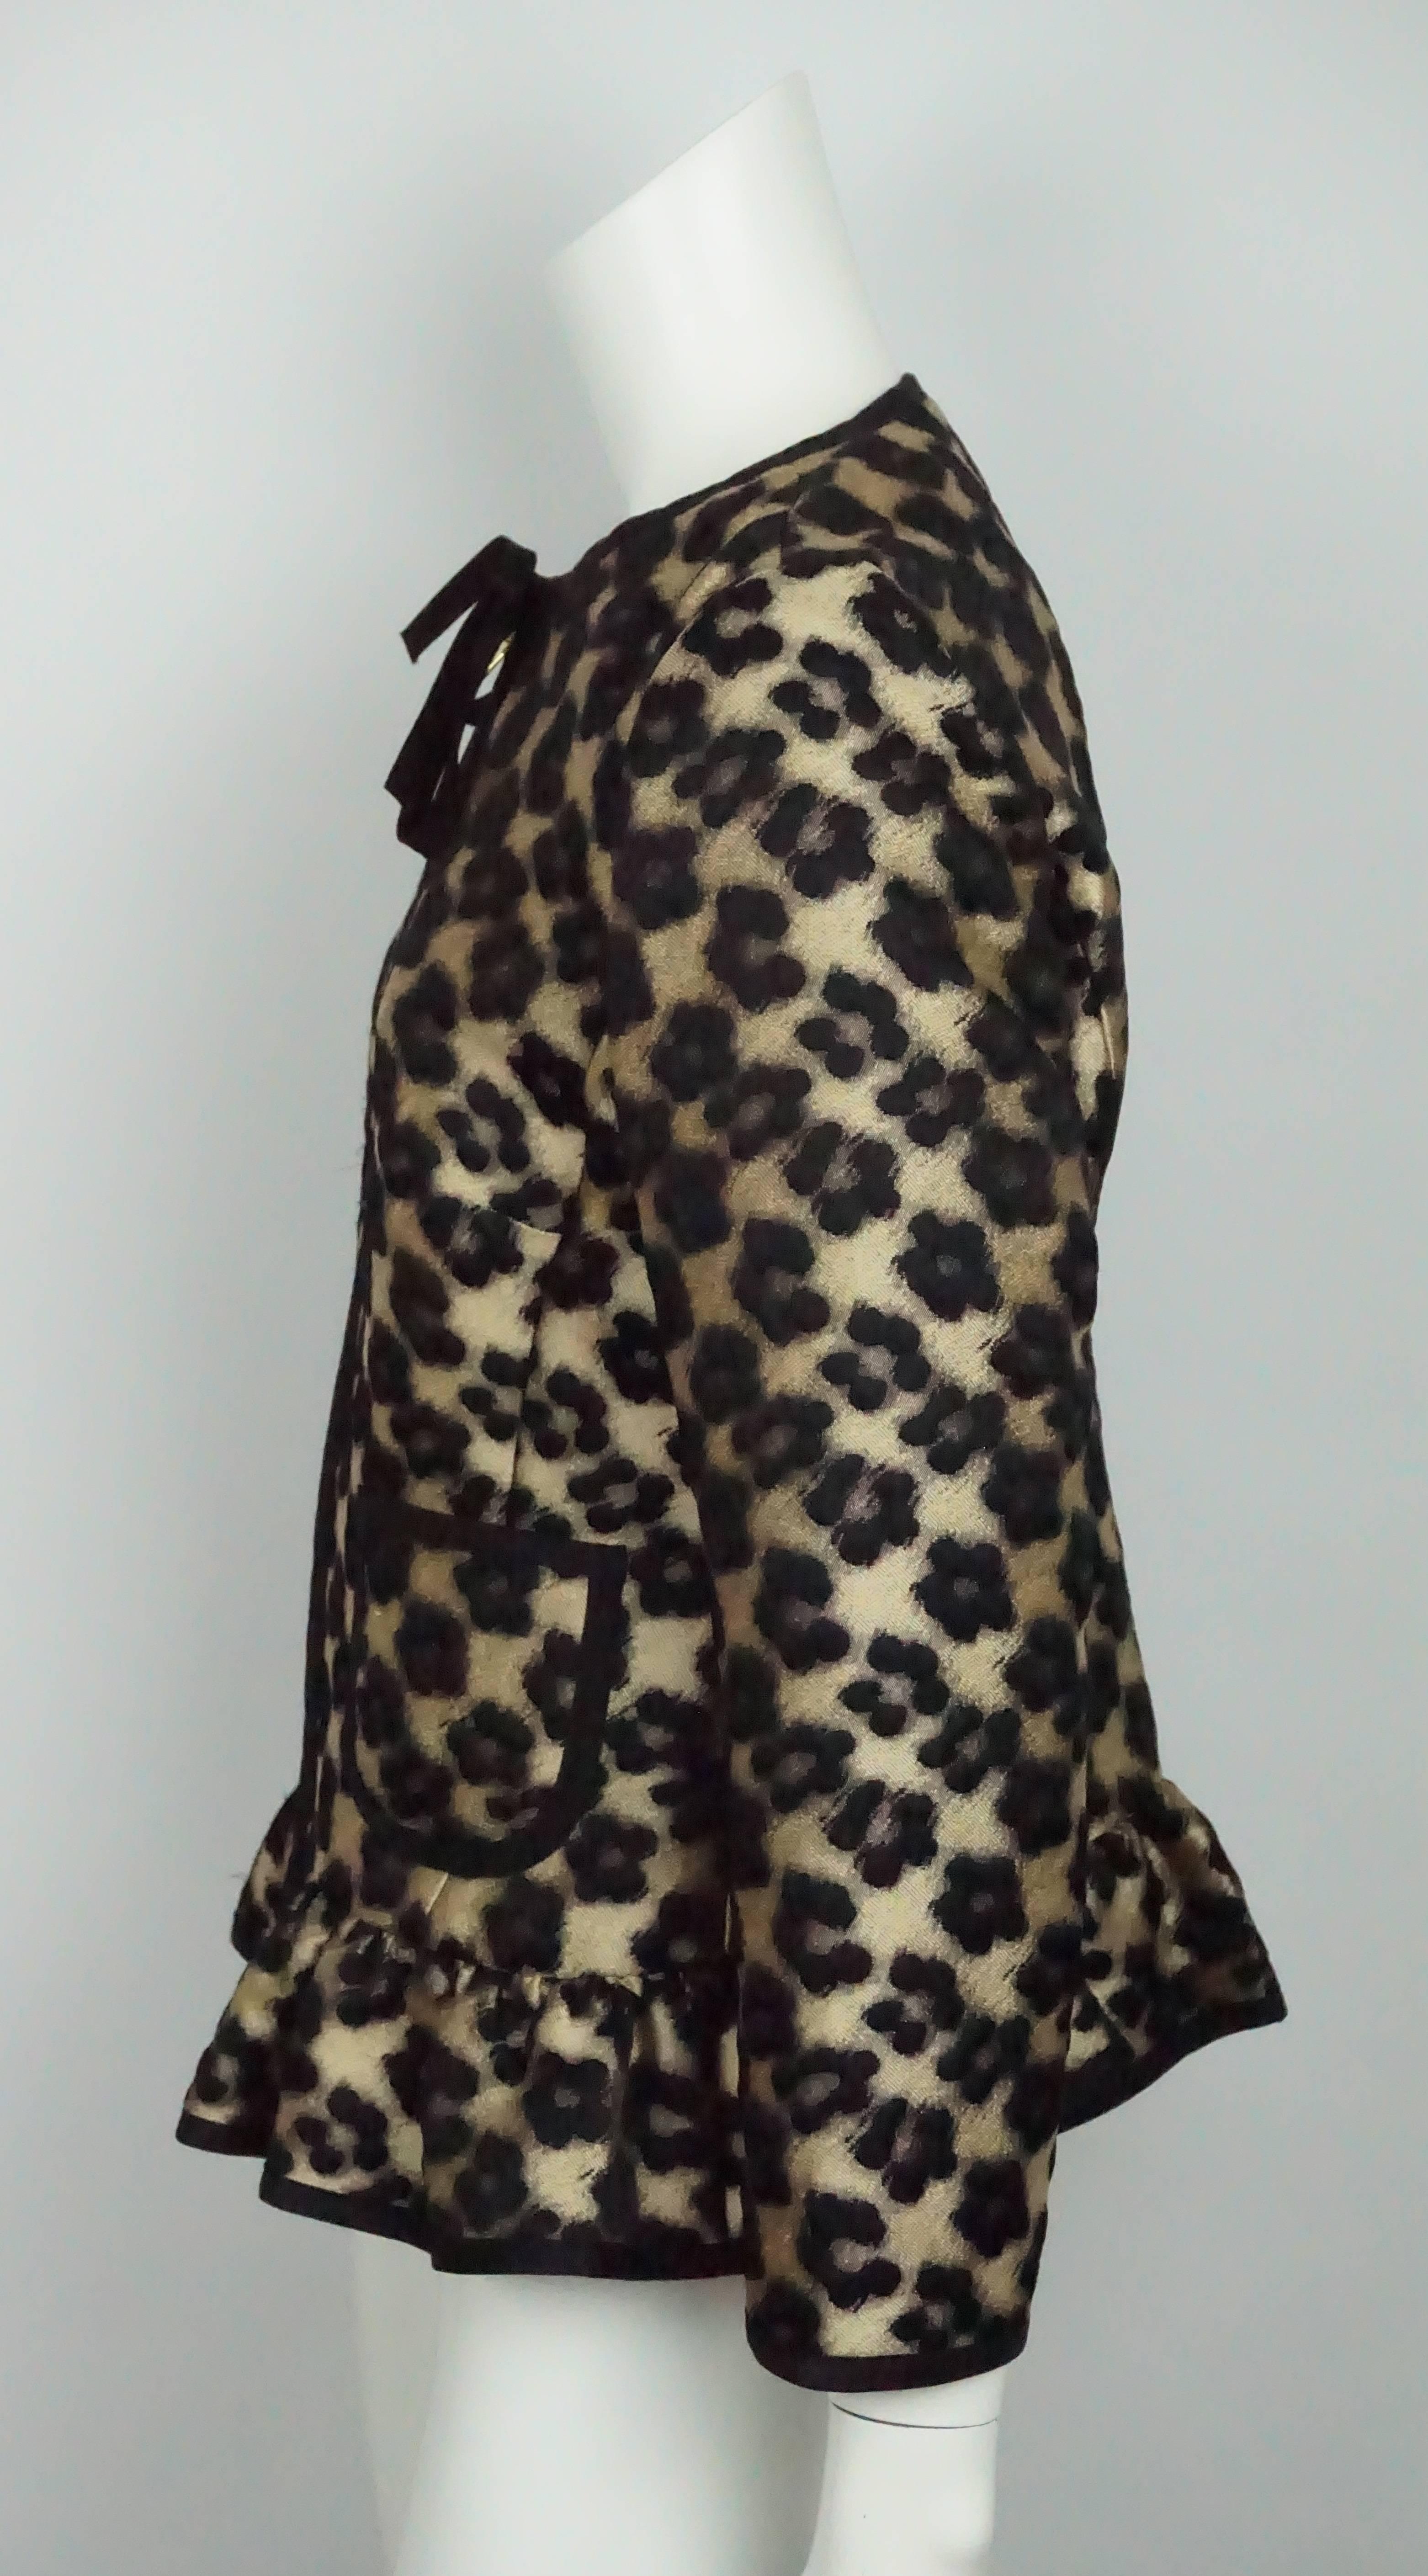 Red Valentino Gold and Black Leopard Print Silk Jacket - 8   This gorgeous leopard print jacket is in excellent condition. The jacket is a wool/ polyester blend and has no lining. There is a ribbon detail around the neckline that goes down the